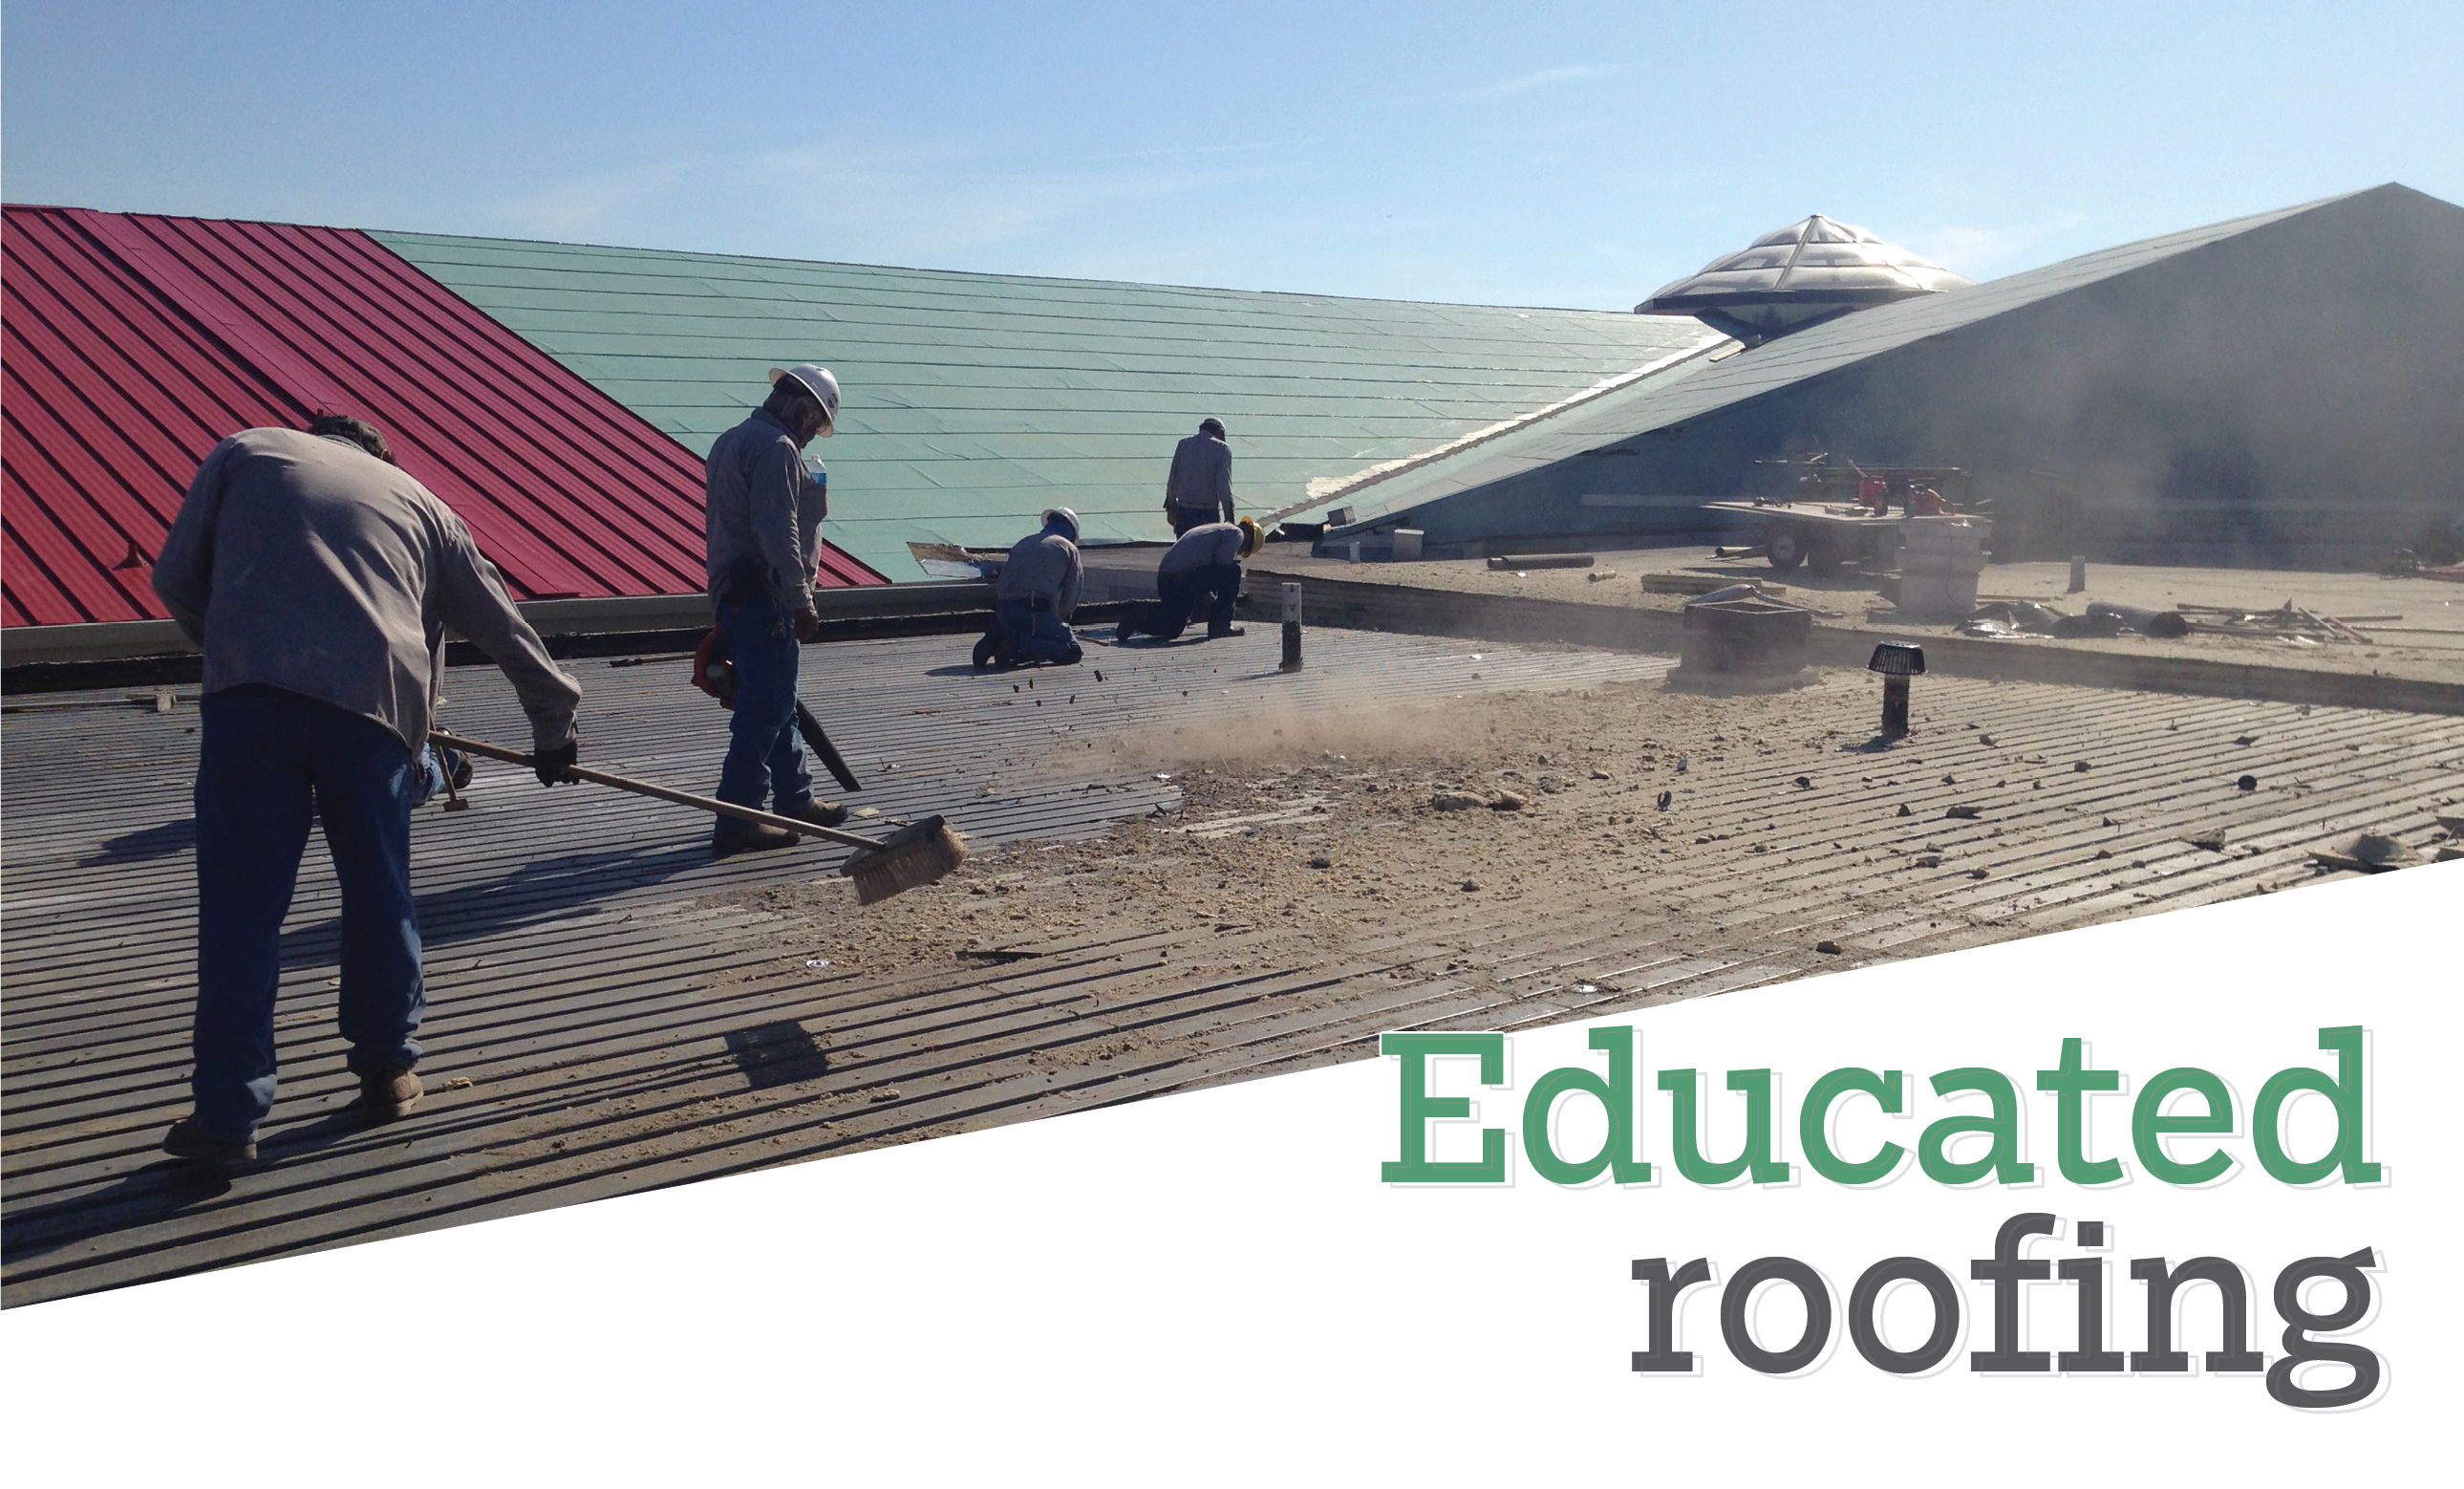 Educated roofing - Rio Roofing corrects leak issues on Roma High School in Texas